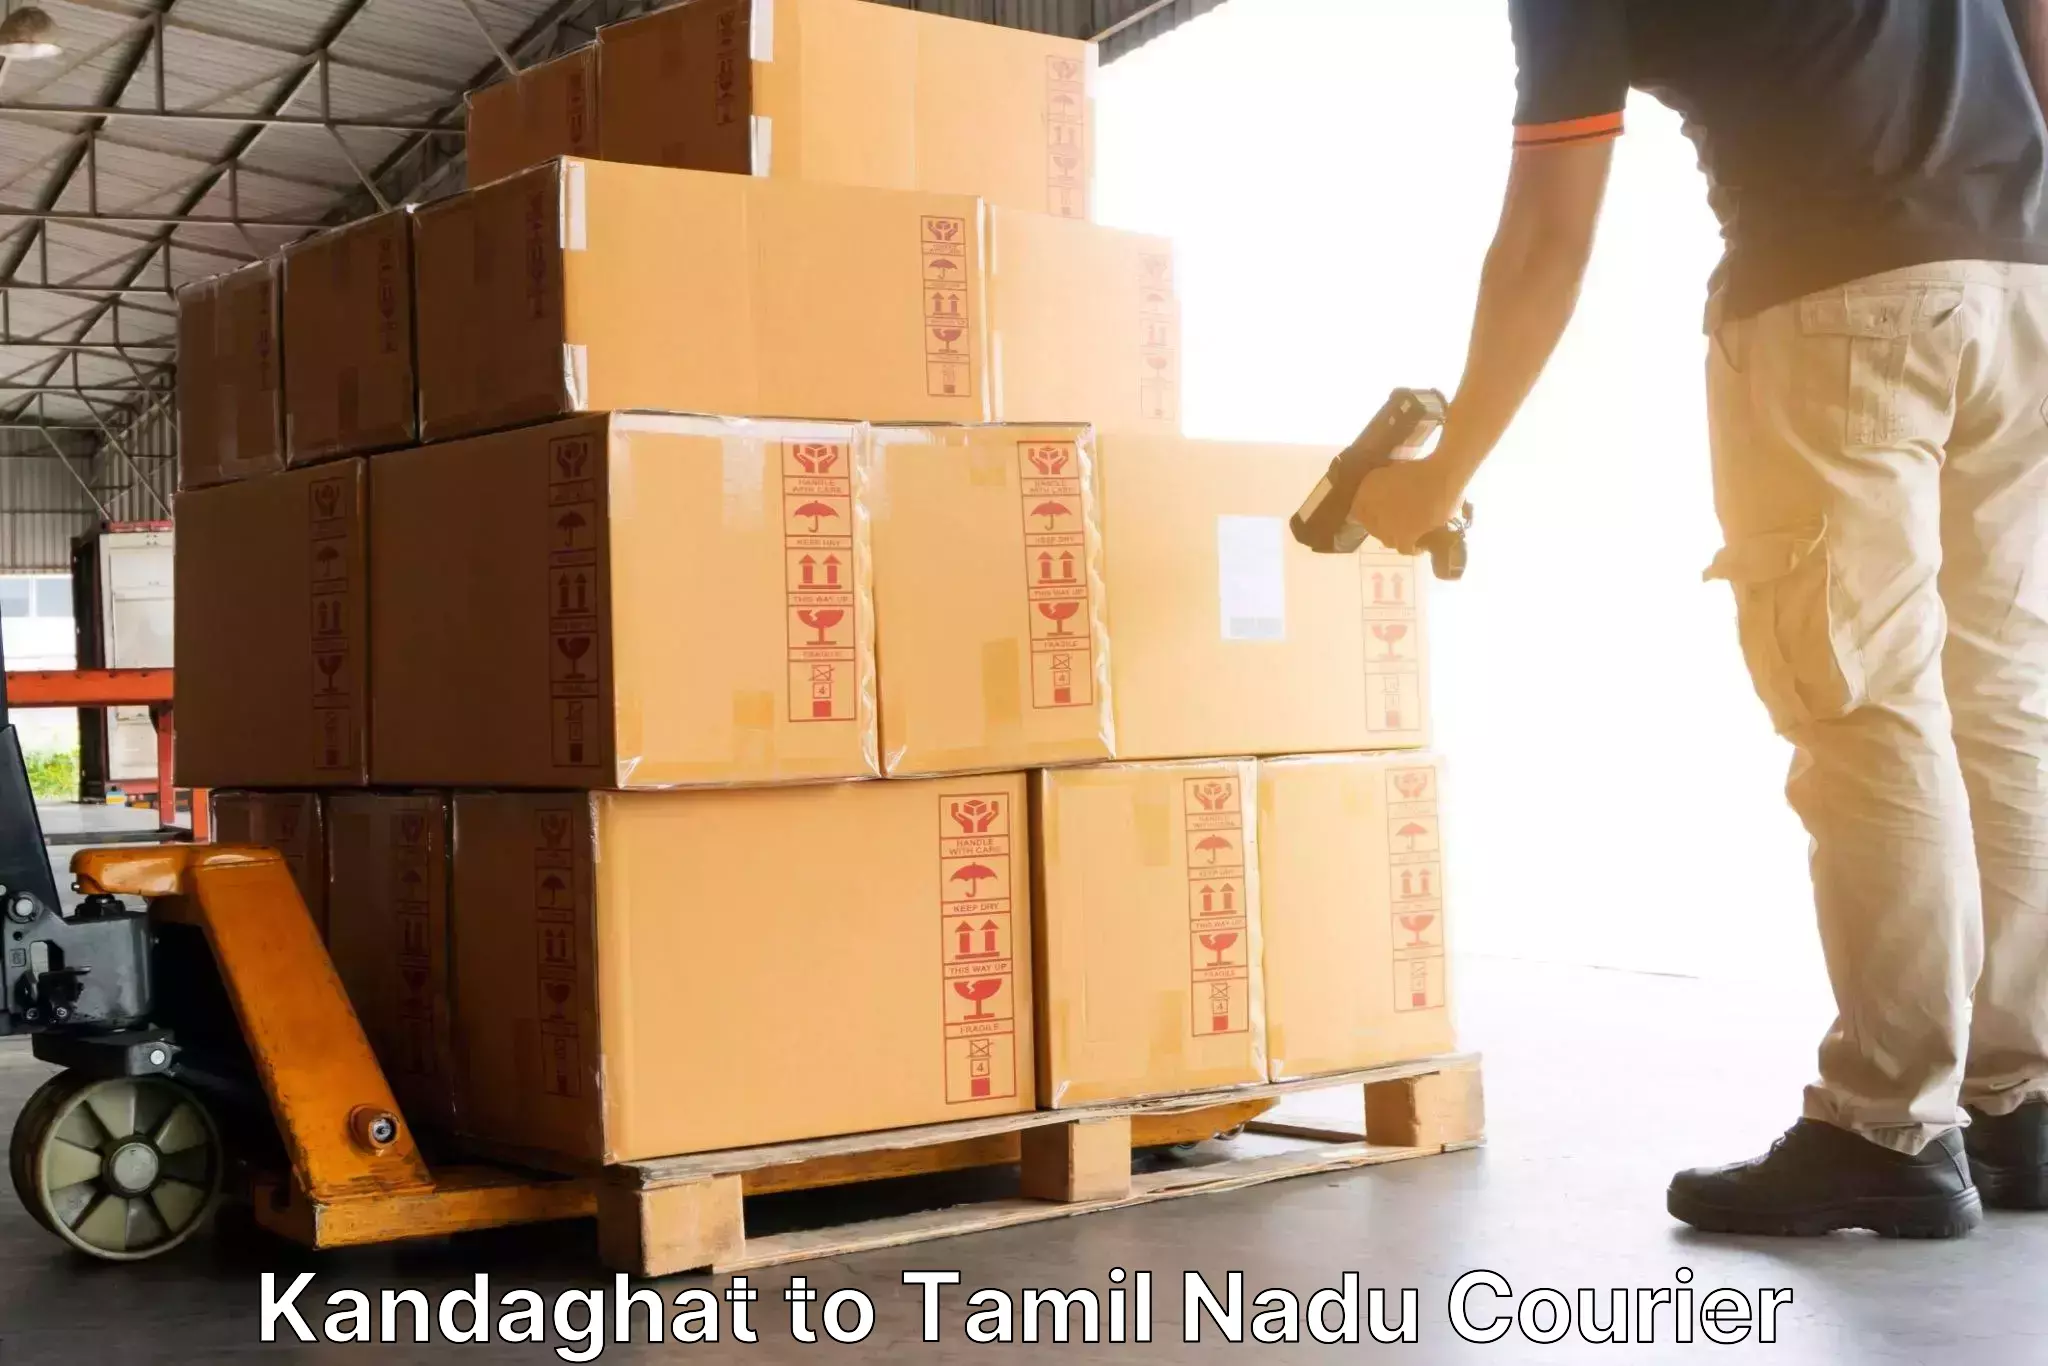 Reliable courier services Kandaghat to Melmaruvathur